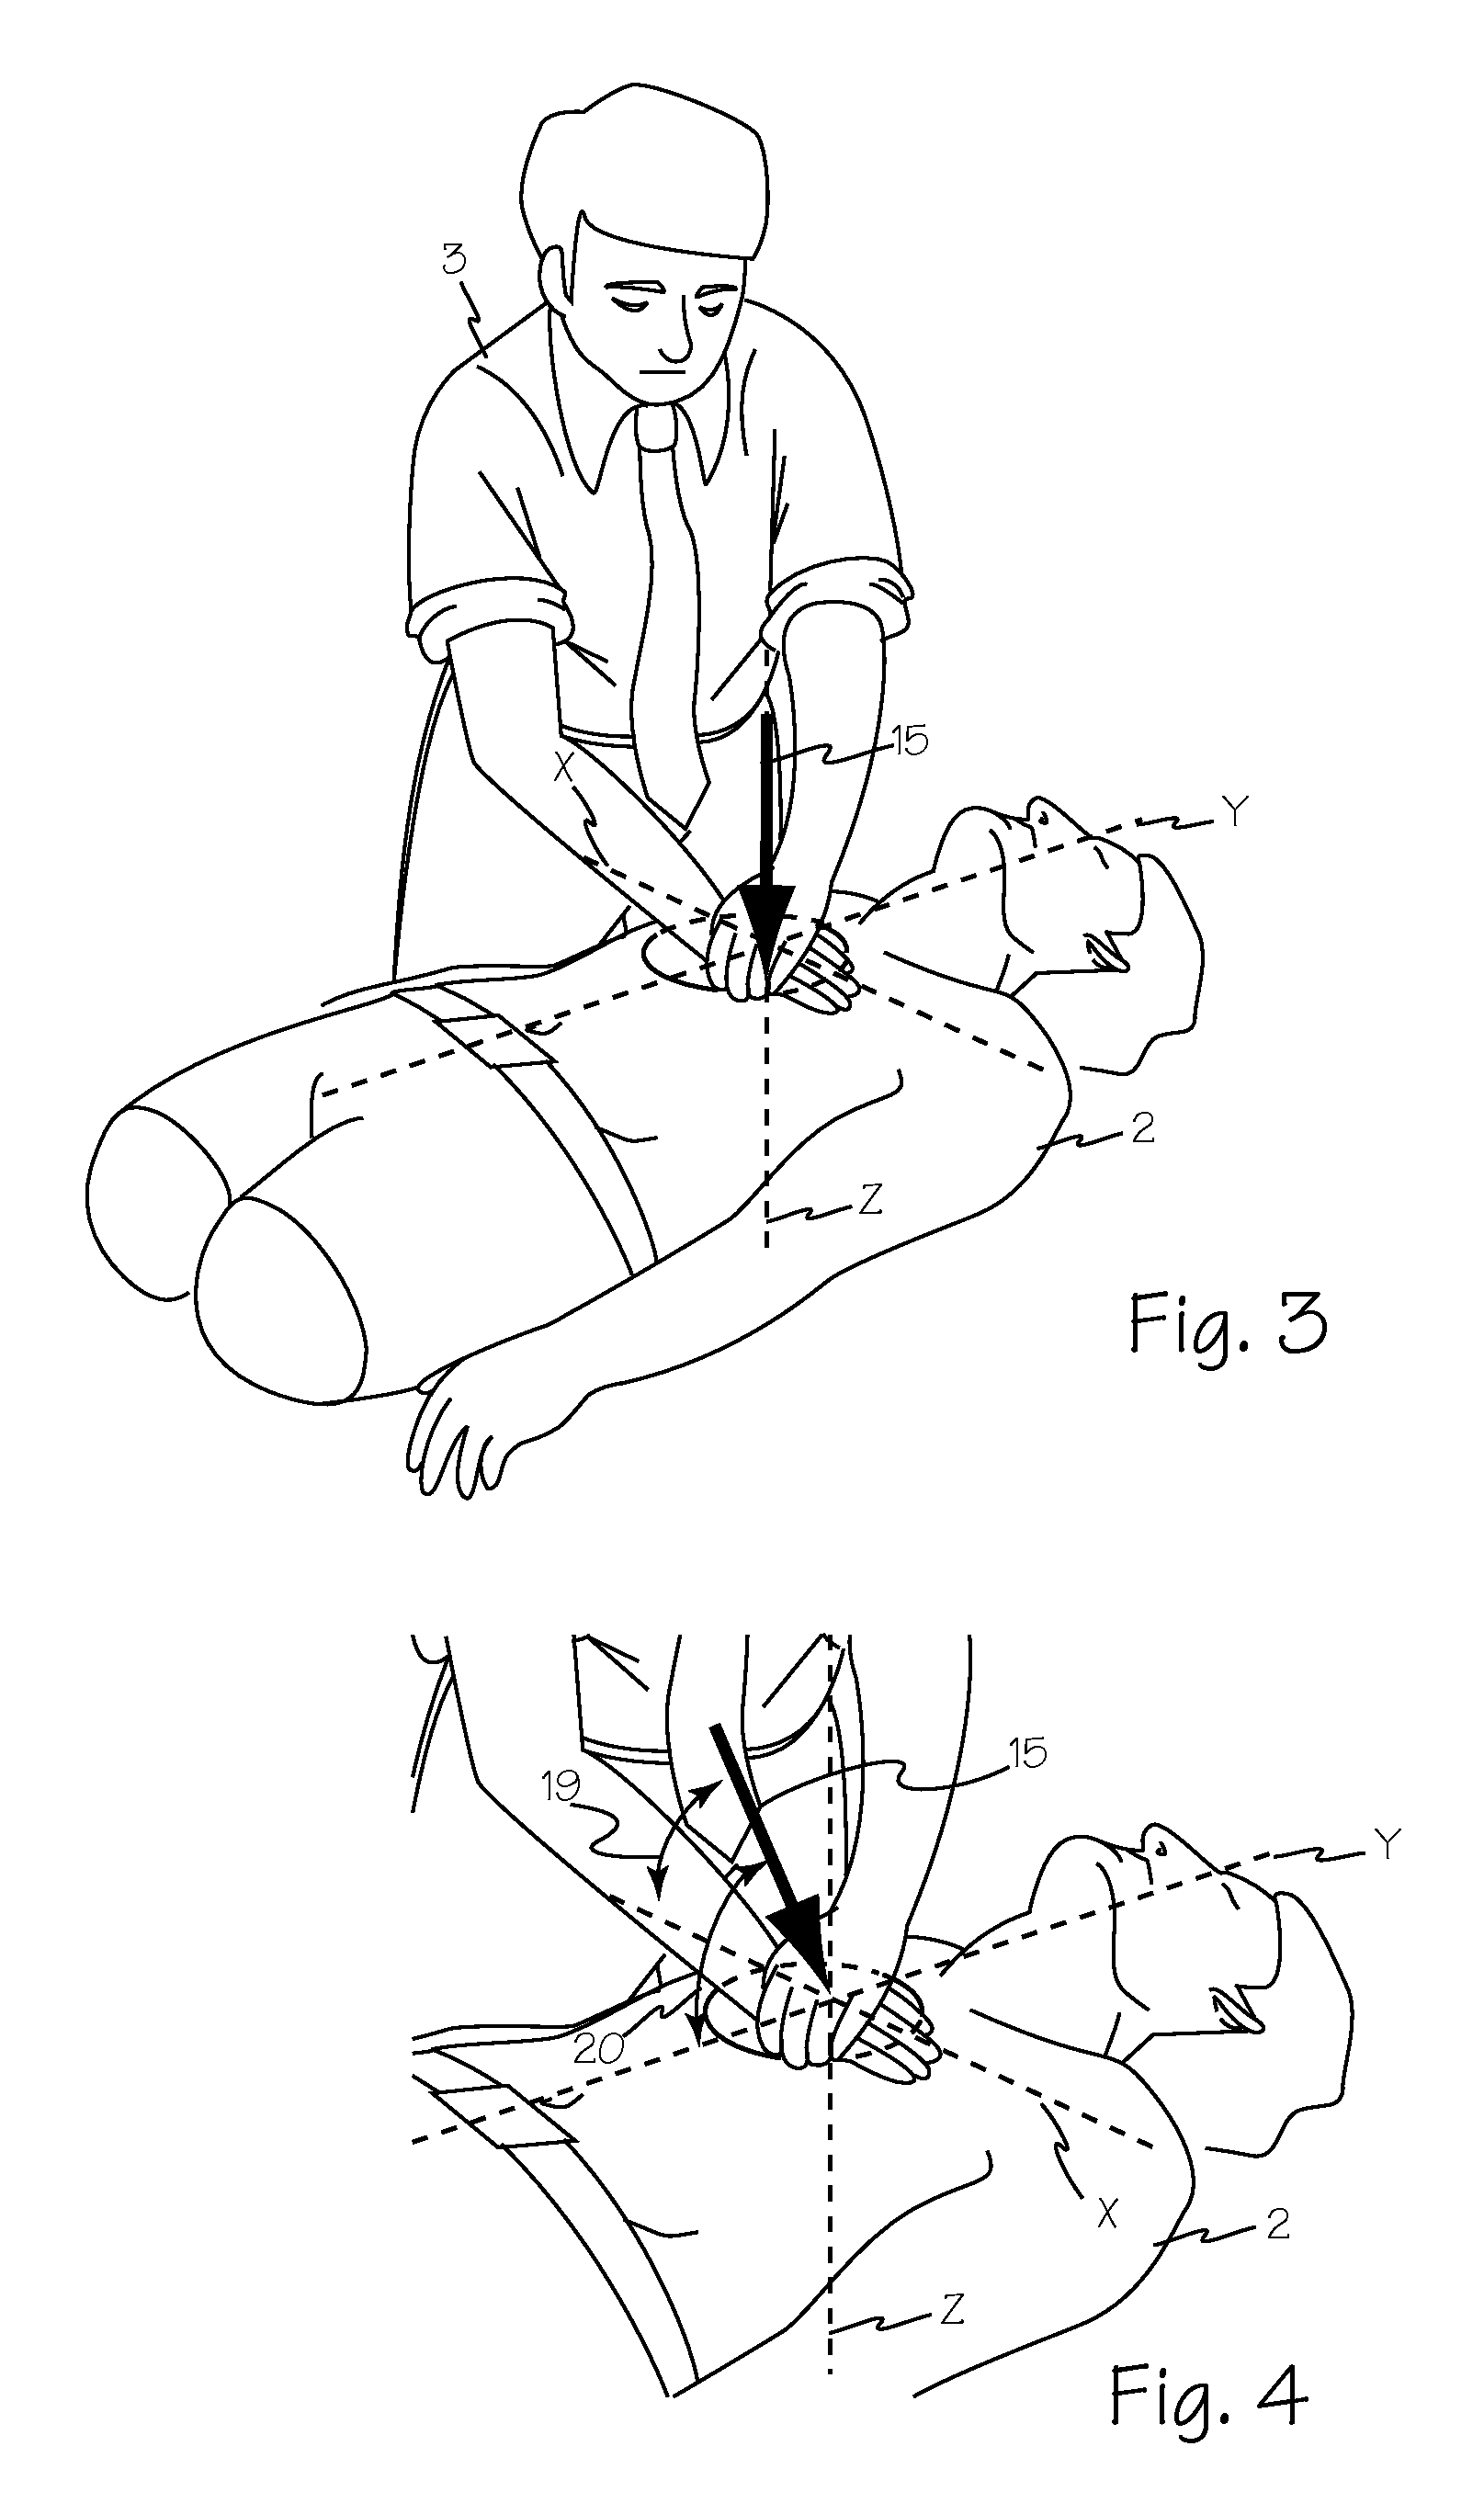 Method and apparatus for monitoring manual chest compression efficiency during CPR